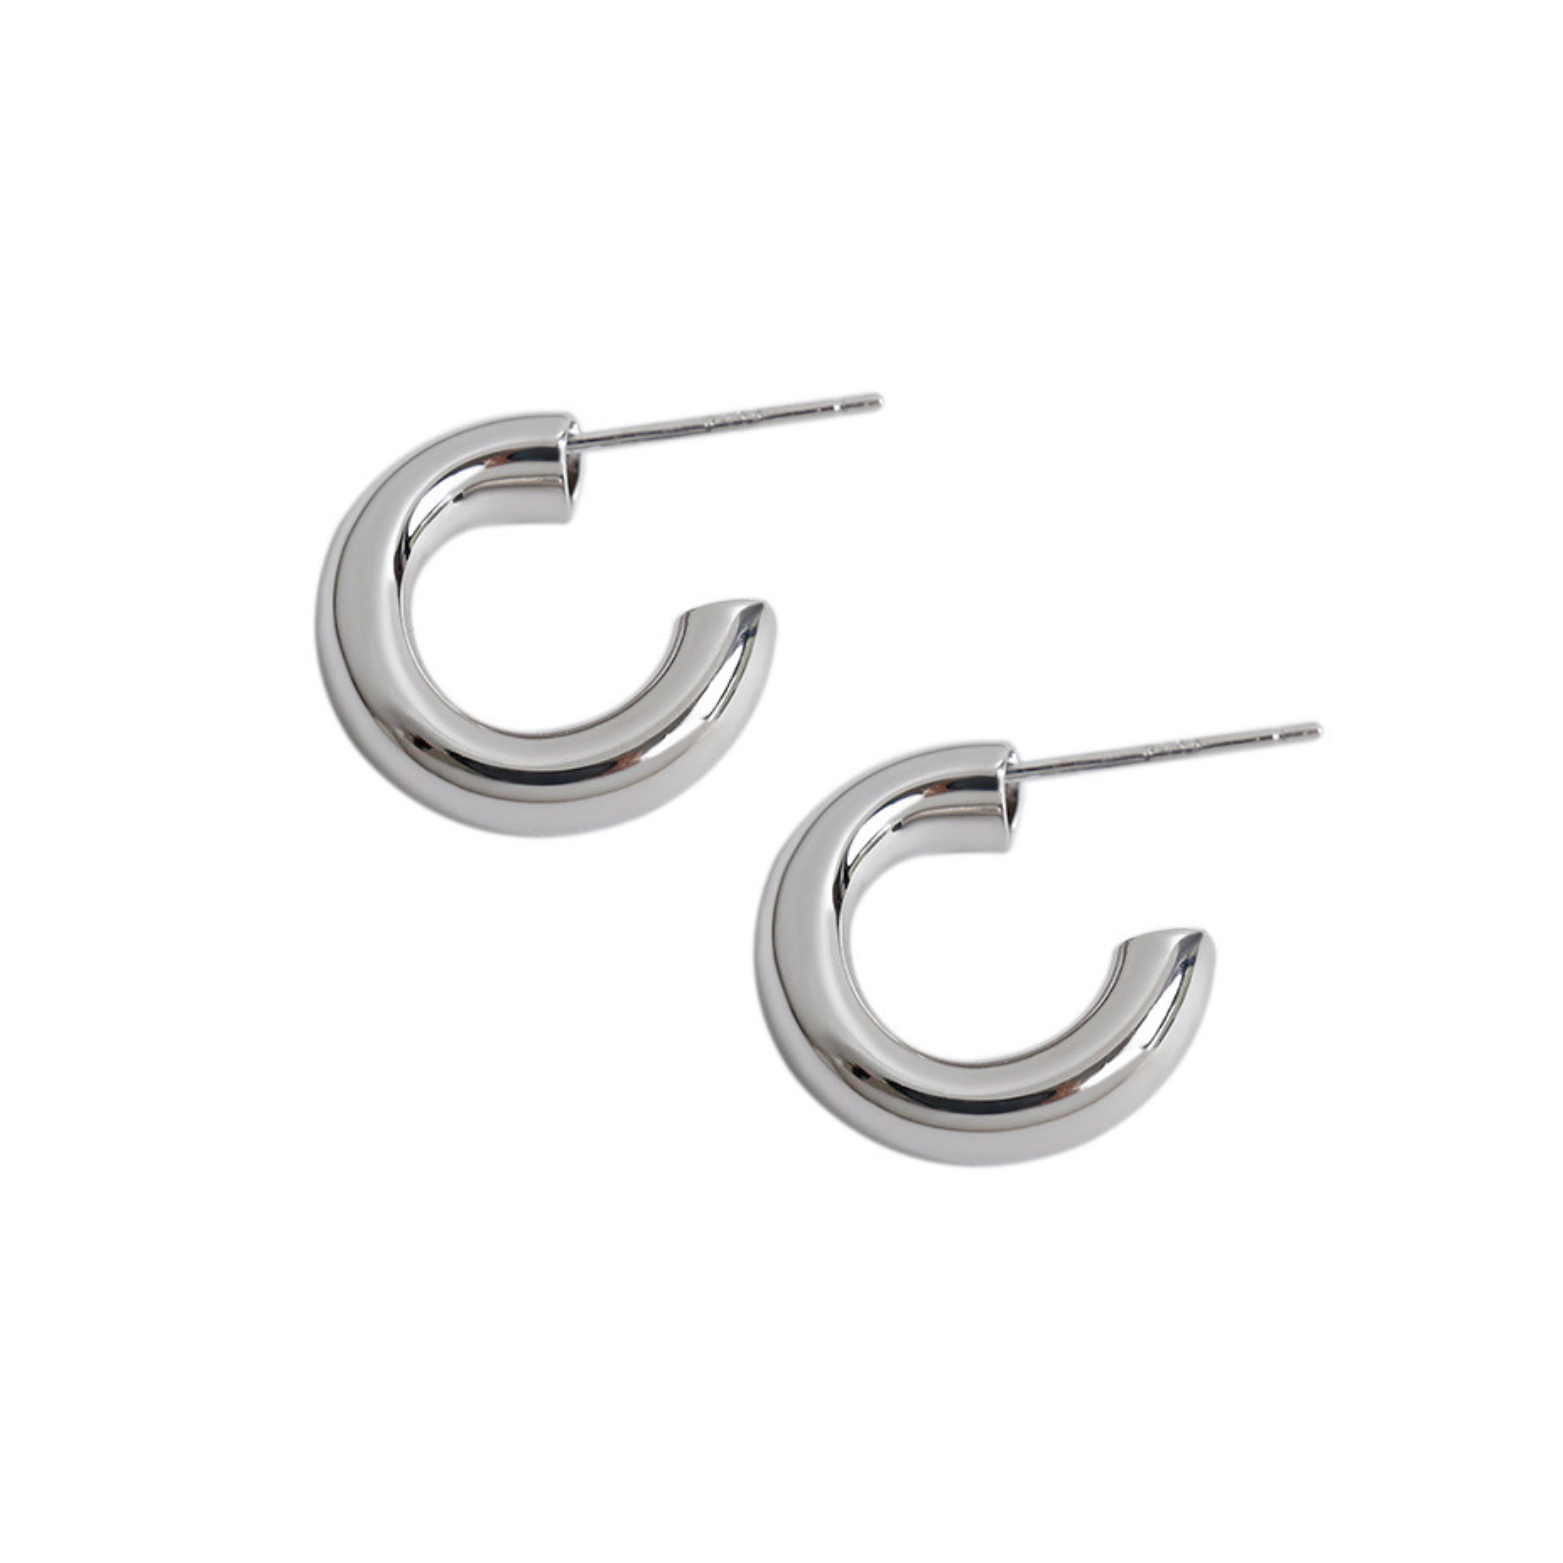 Sterling silver hoop earrings from the Samantha collection